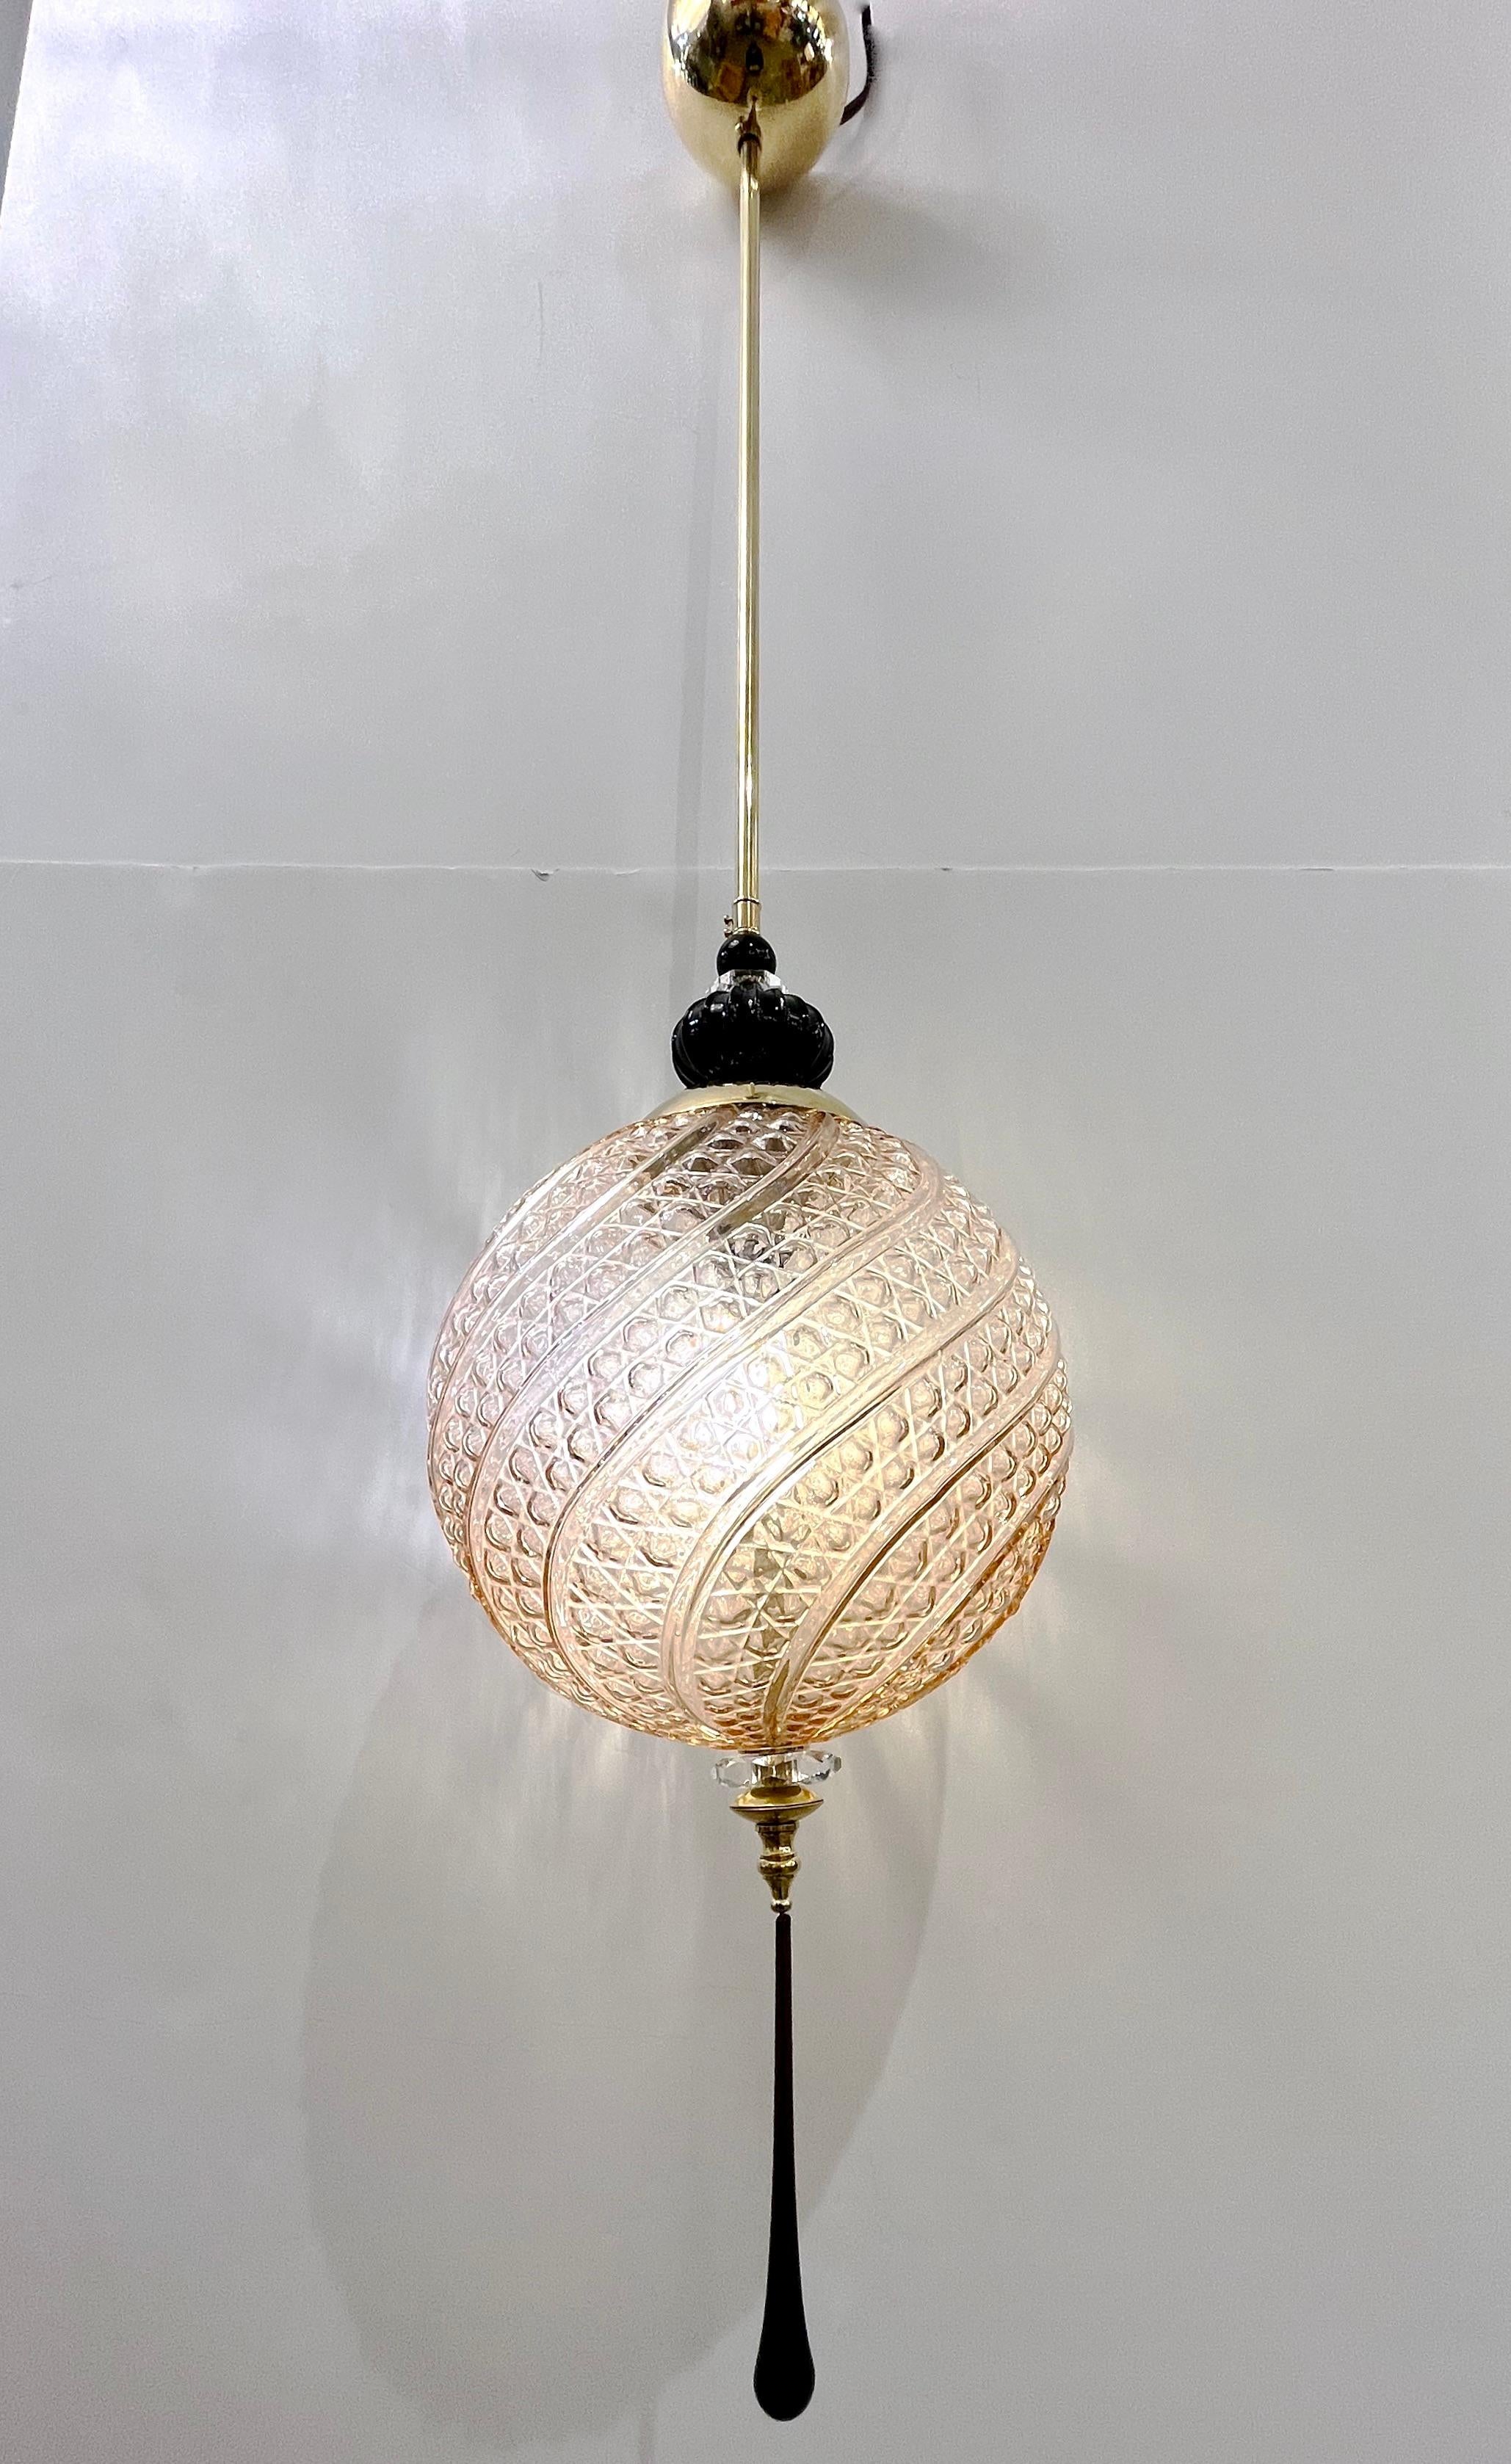 Contemporary orientalist style custom lantern chandelier, of a modern Venetian geometric series with 4 shapes as per images, entirely handcrafted in Italy, here with brass hardware, the organic round sphere in an innovative blown textured Murano